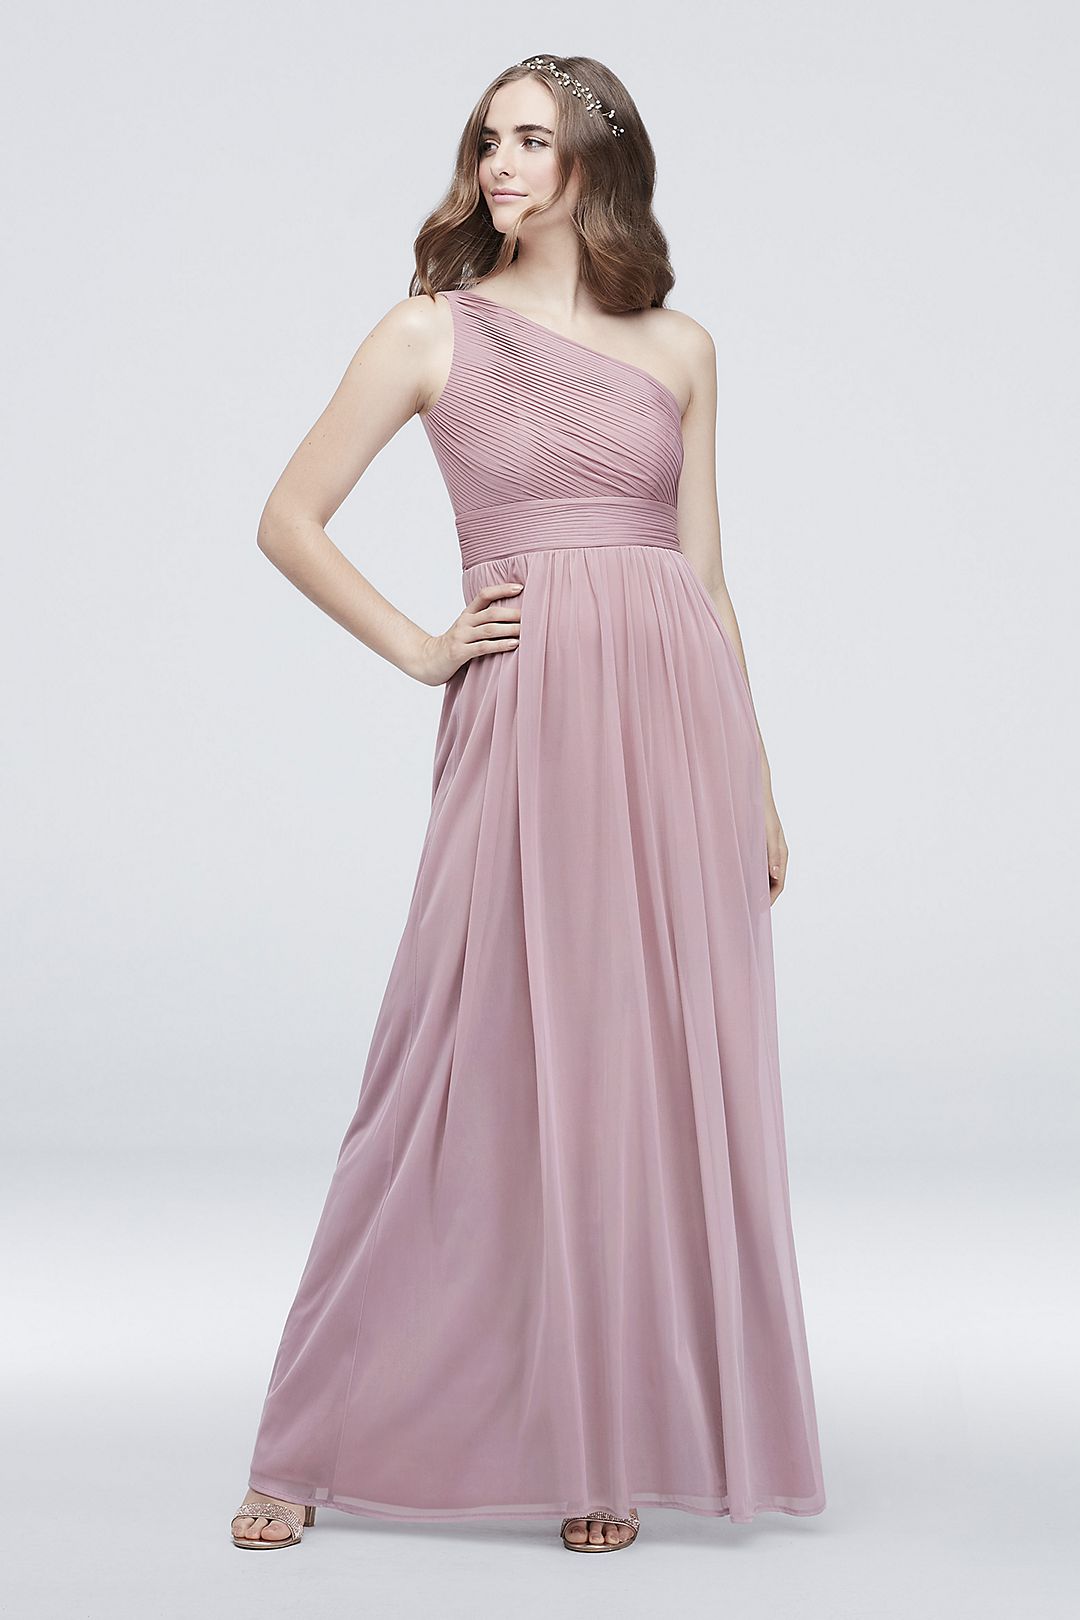 Micro-Pleated Mesh One-Shoulder Dress Image 1